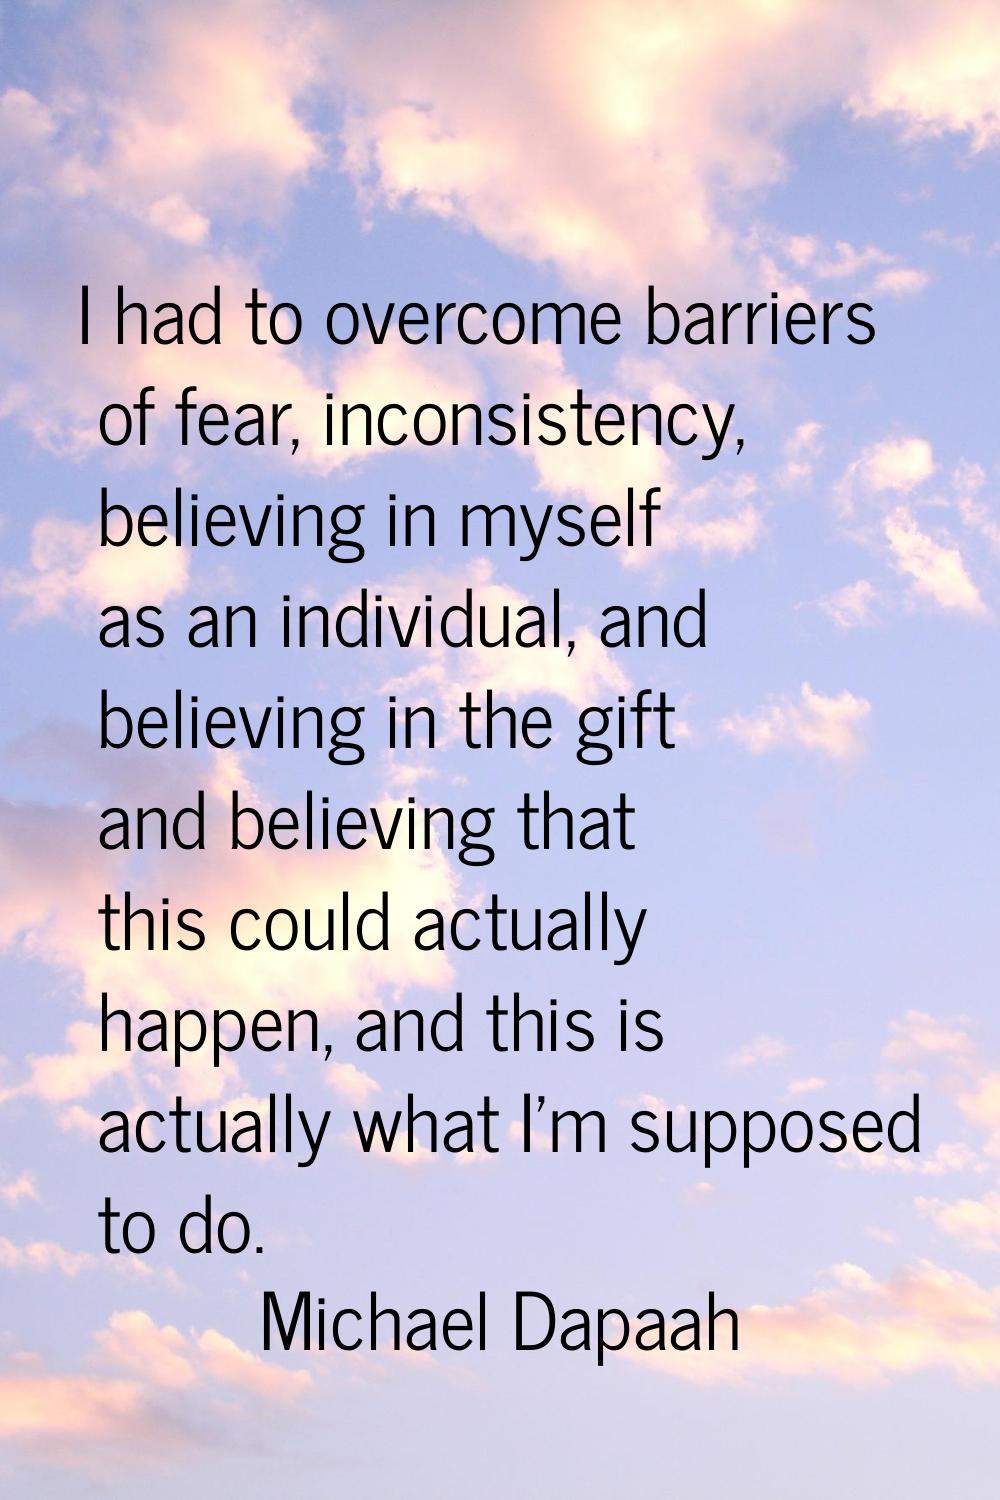 I had to overcome barriers of fear, inconsistency, believing in myself as an individual, and believ